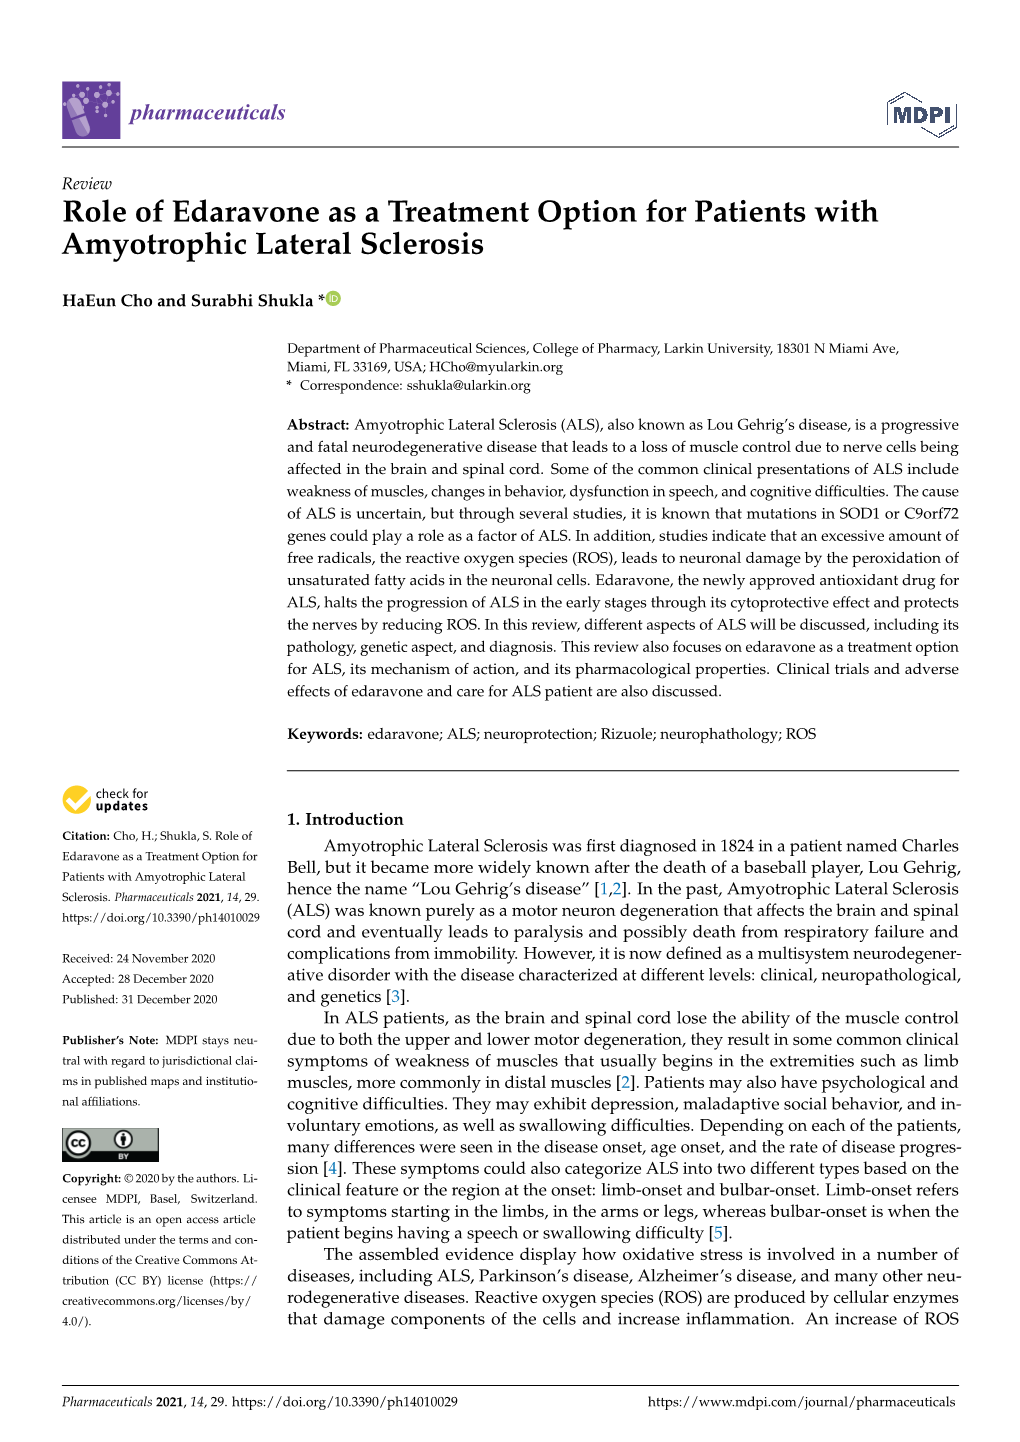 Role of Edaravone As a Treatment Option for Patients with Amyotrophic Lateral Sclerosis